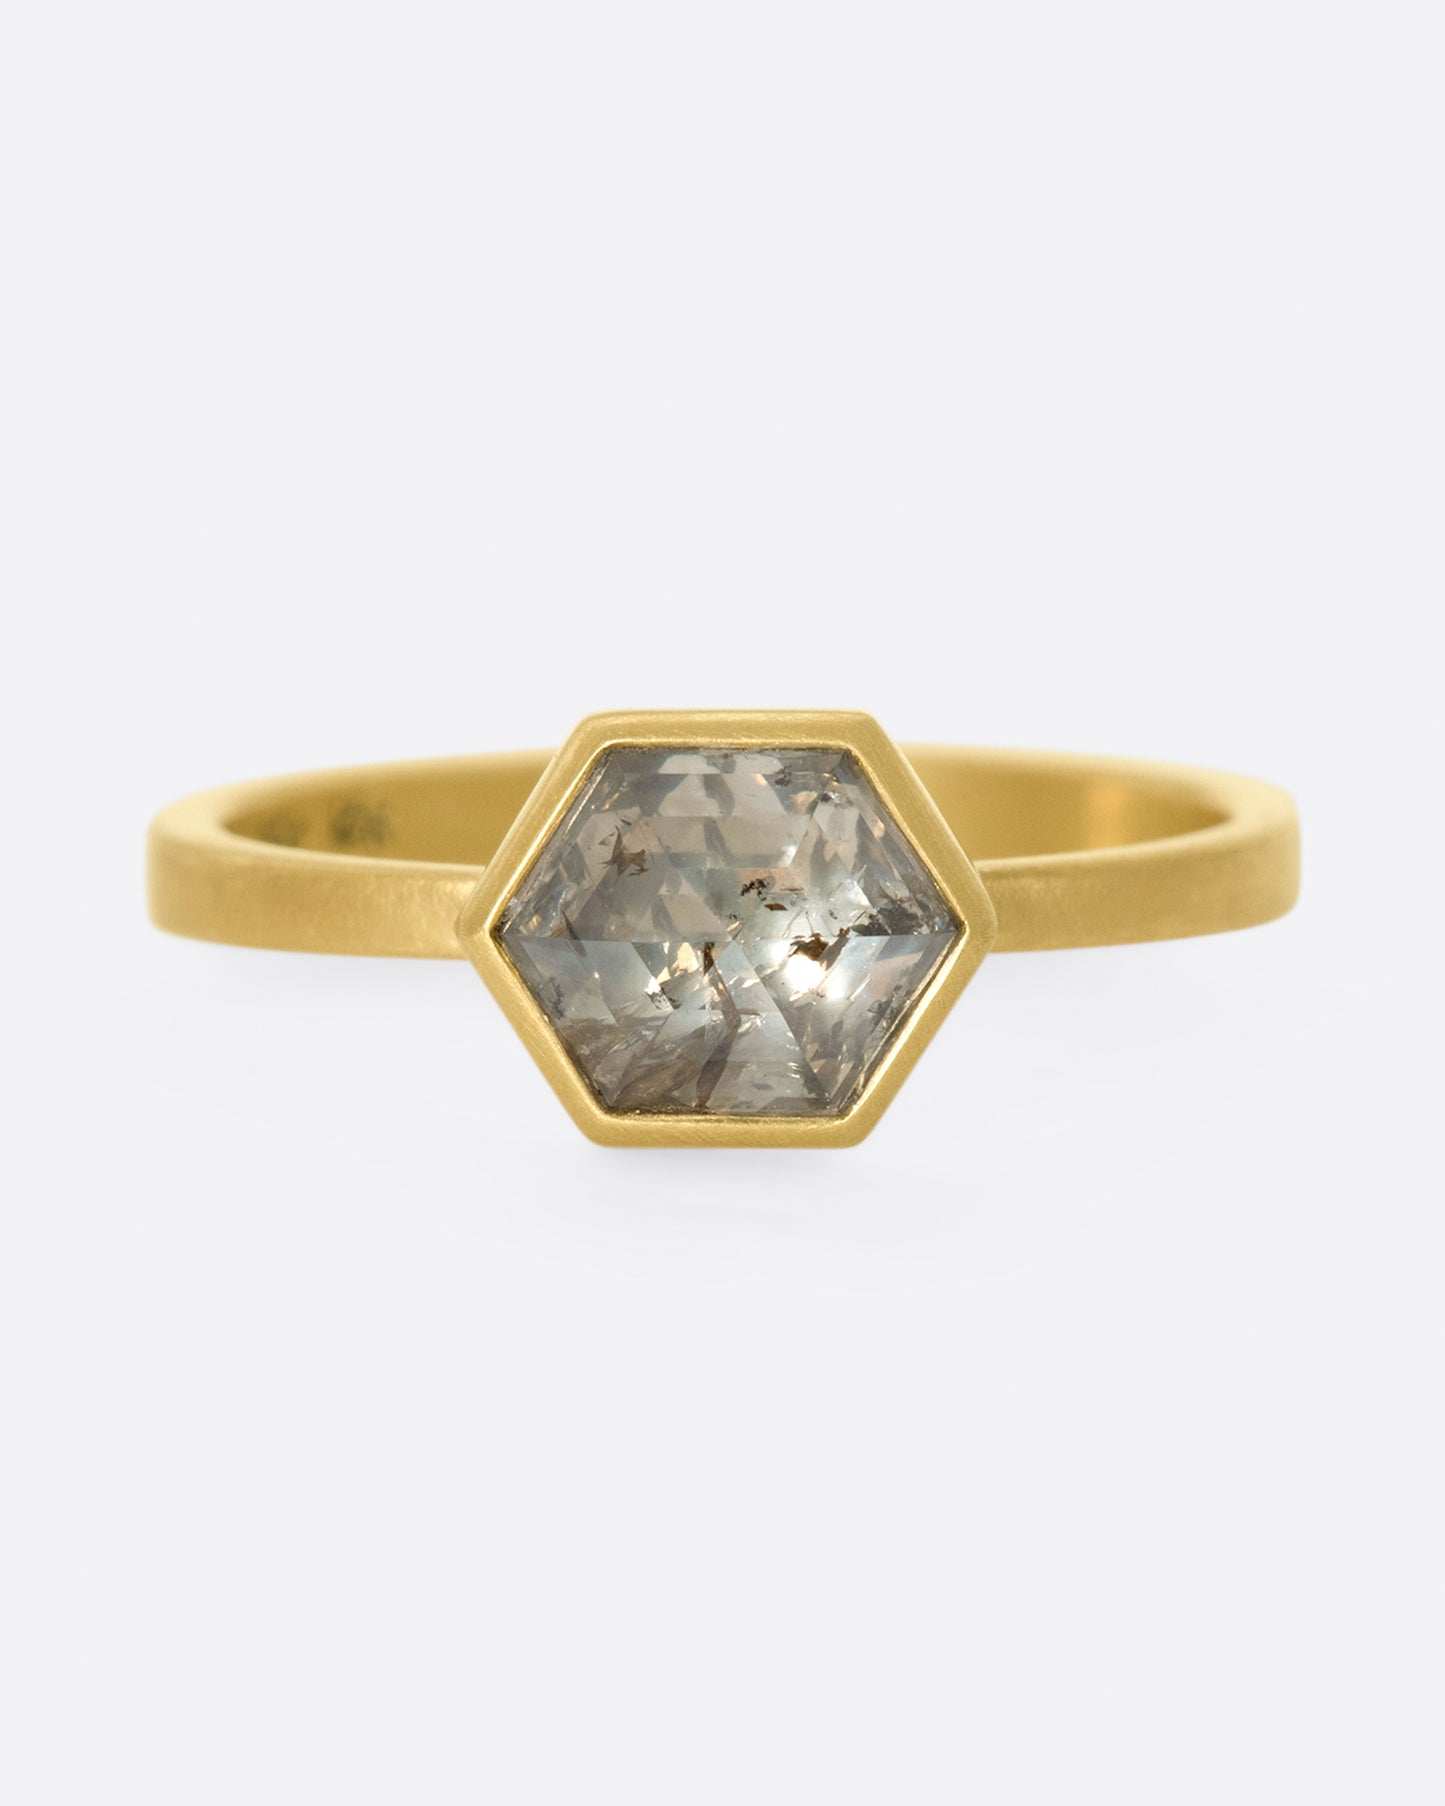 A hexagonal, faceted diamond whose colors range from shades of brown to gray